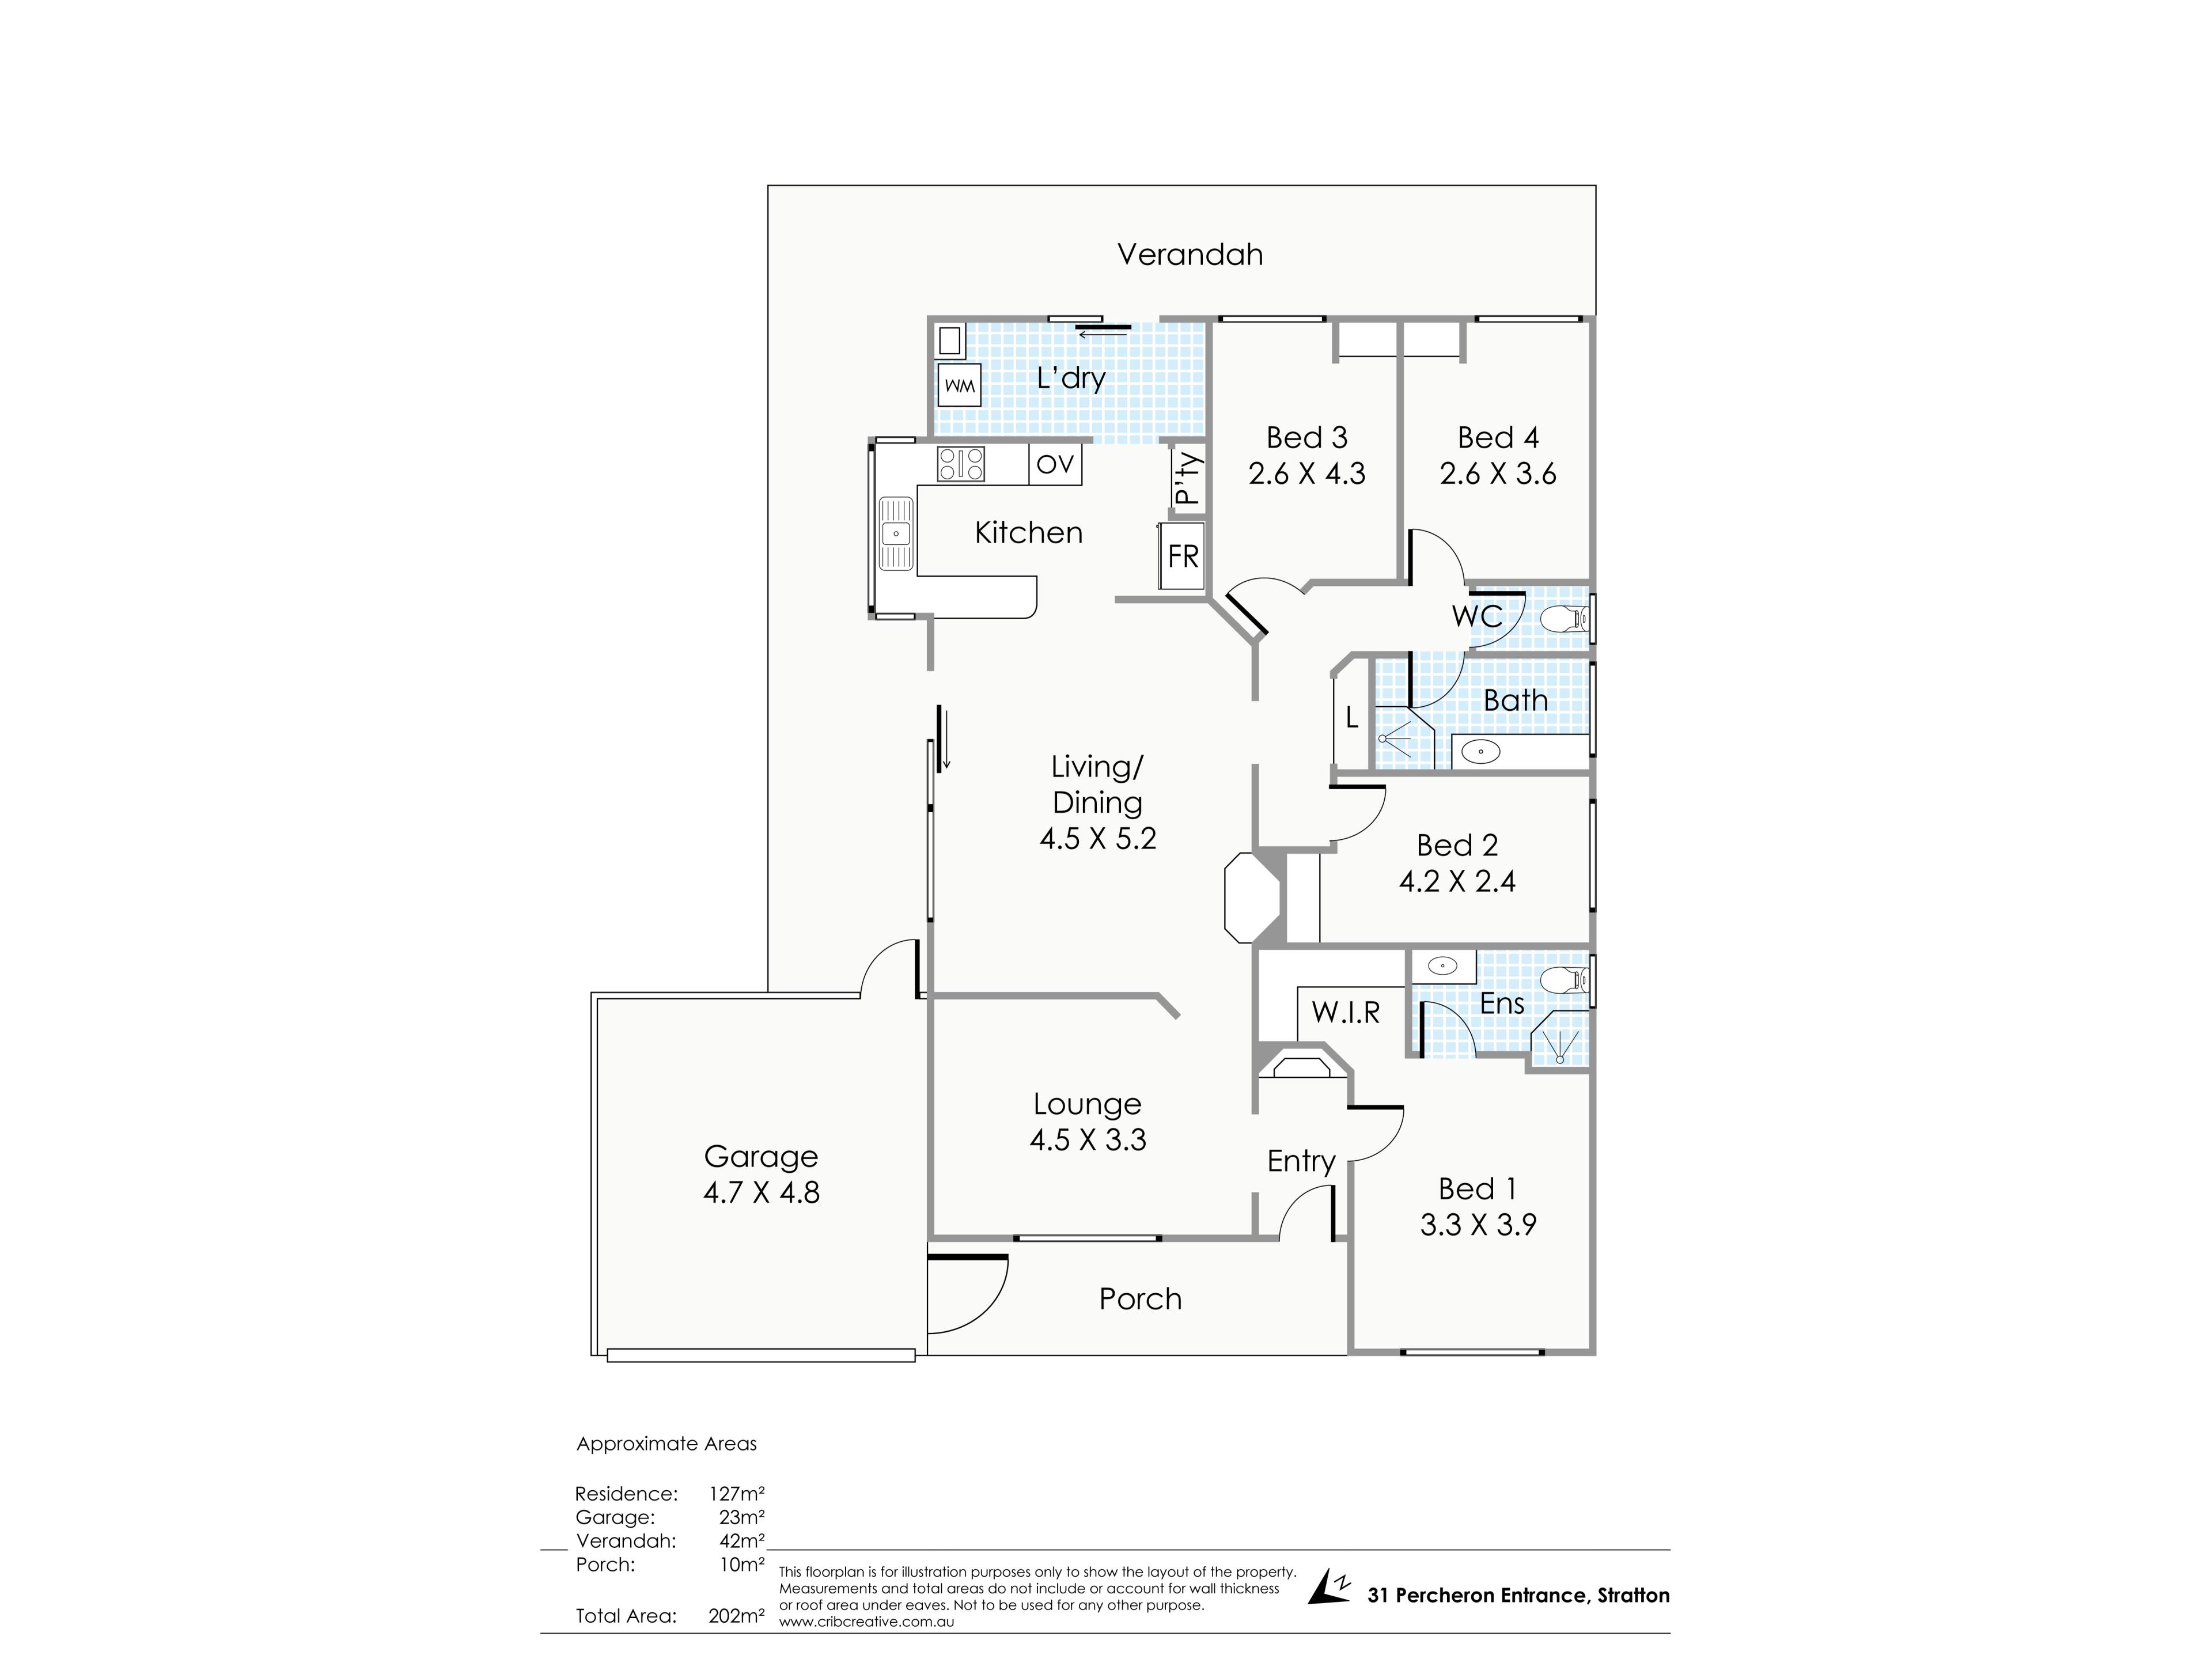 Property for sale in Stratton : Earnshaws Real Estate